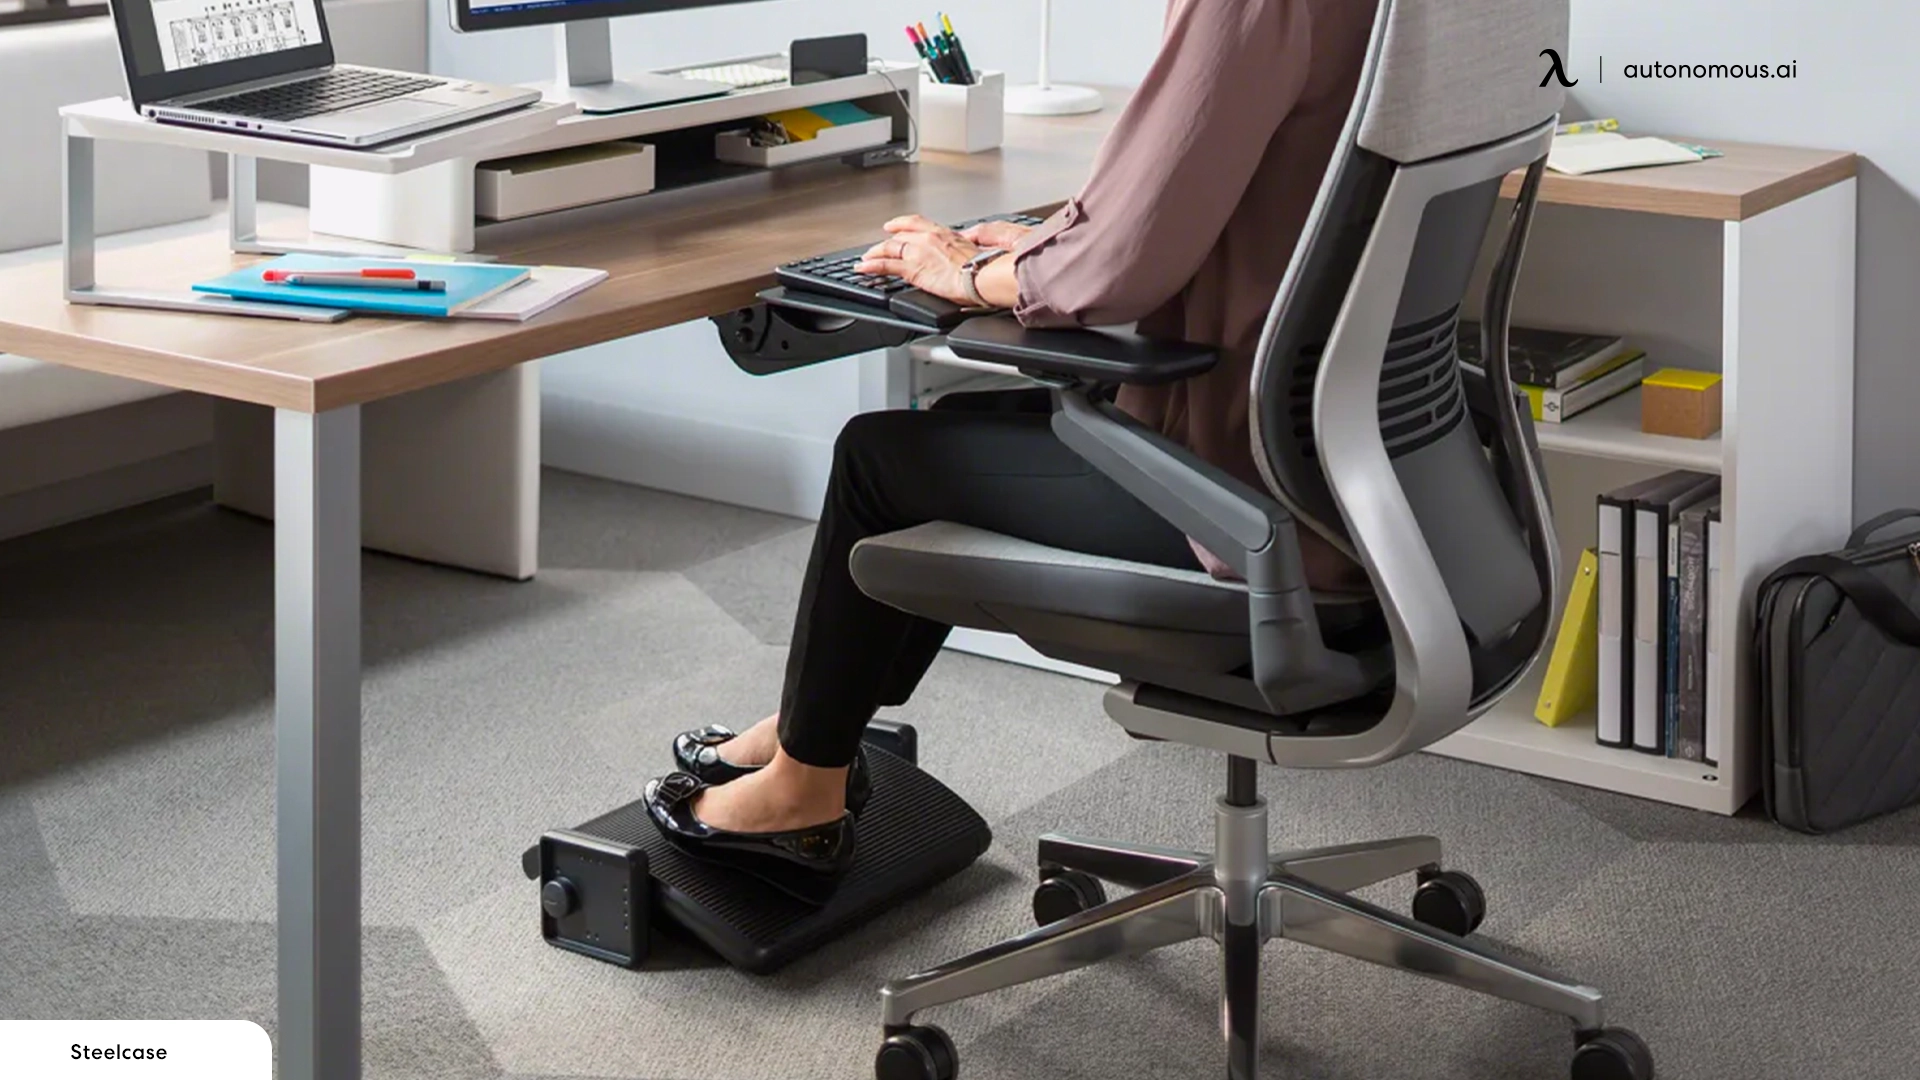 The Benefits of Using an Office Footrest